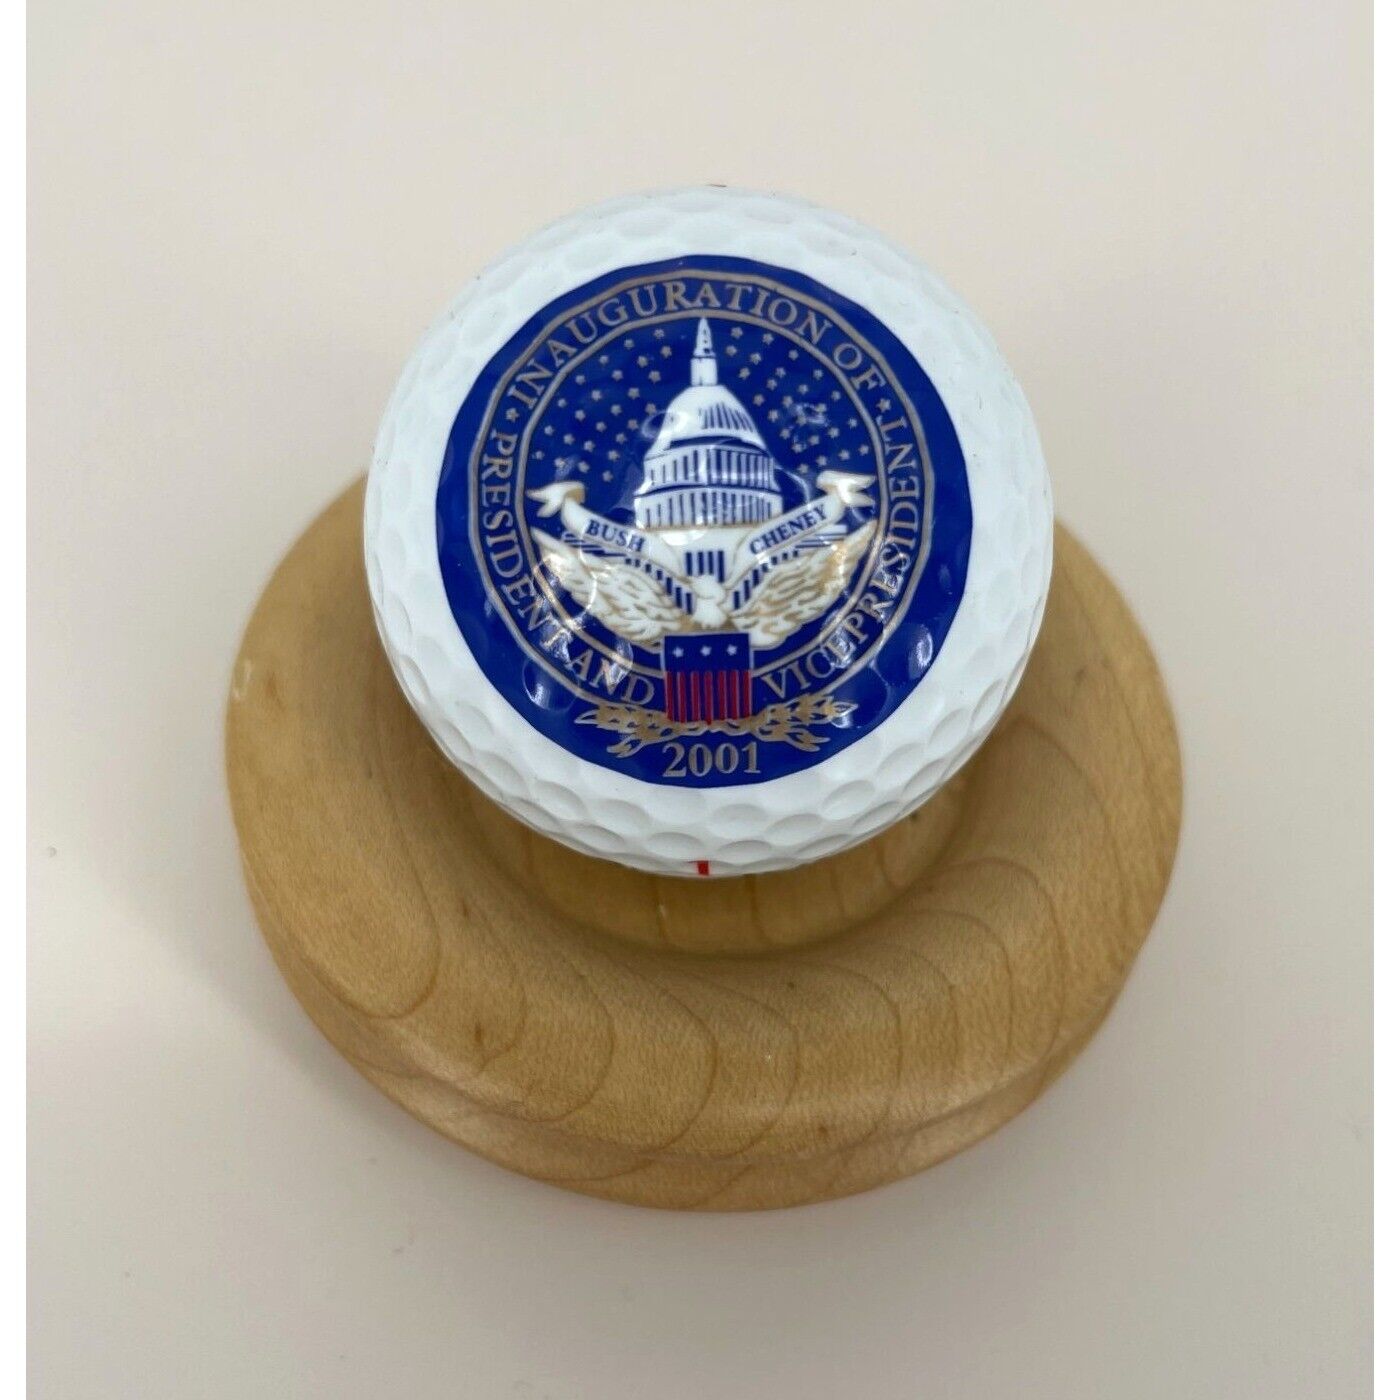 Golf Ball Inauguration of President & Vice President 2001 Commemorative Collecti